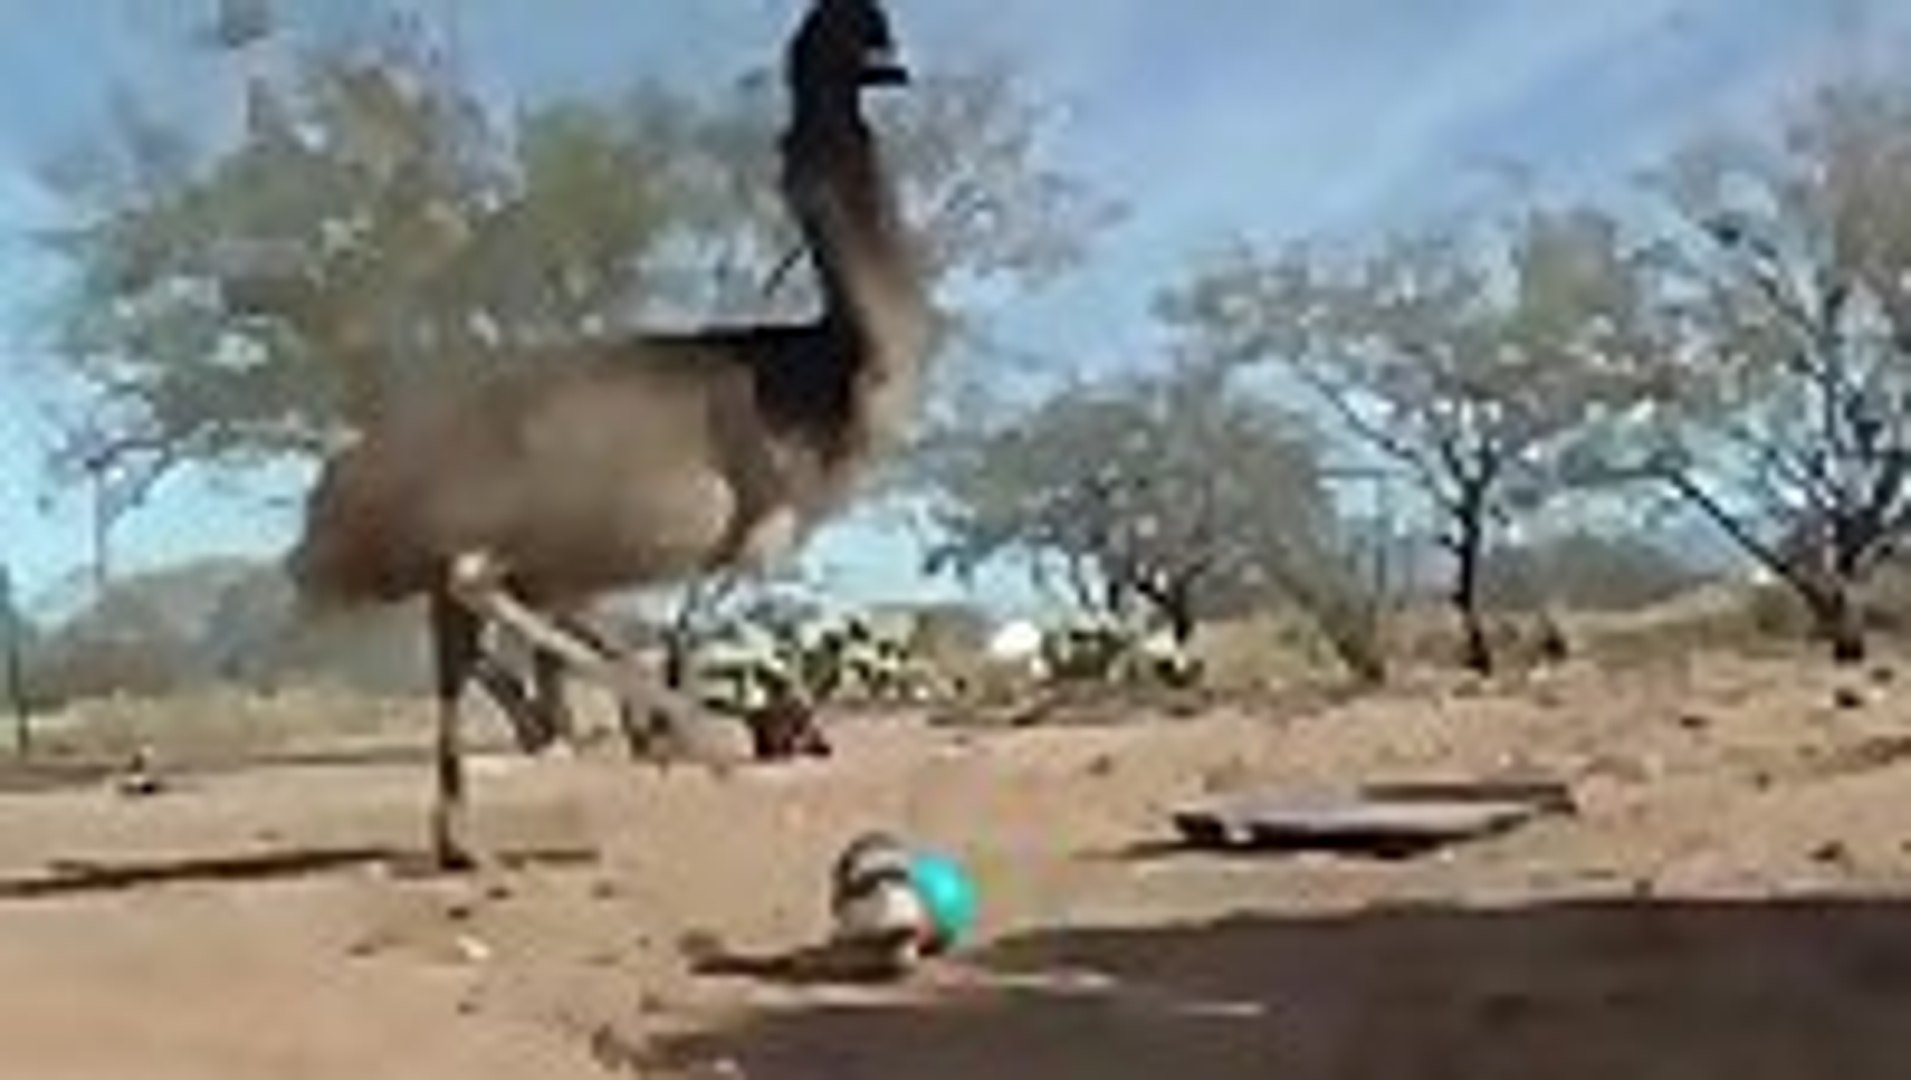 Ostriches freaking out over weasel ball toy